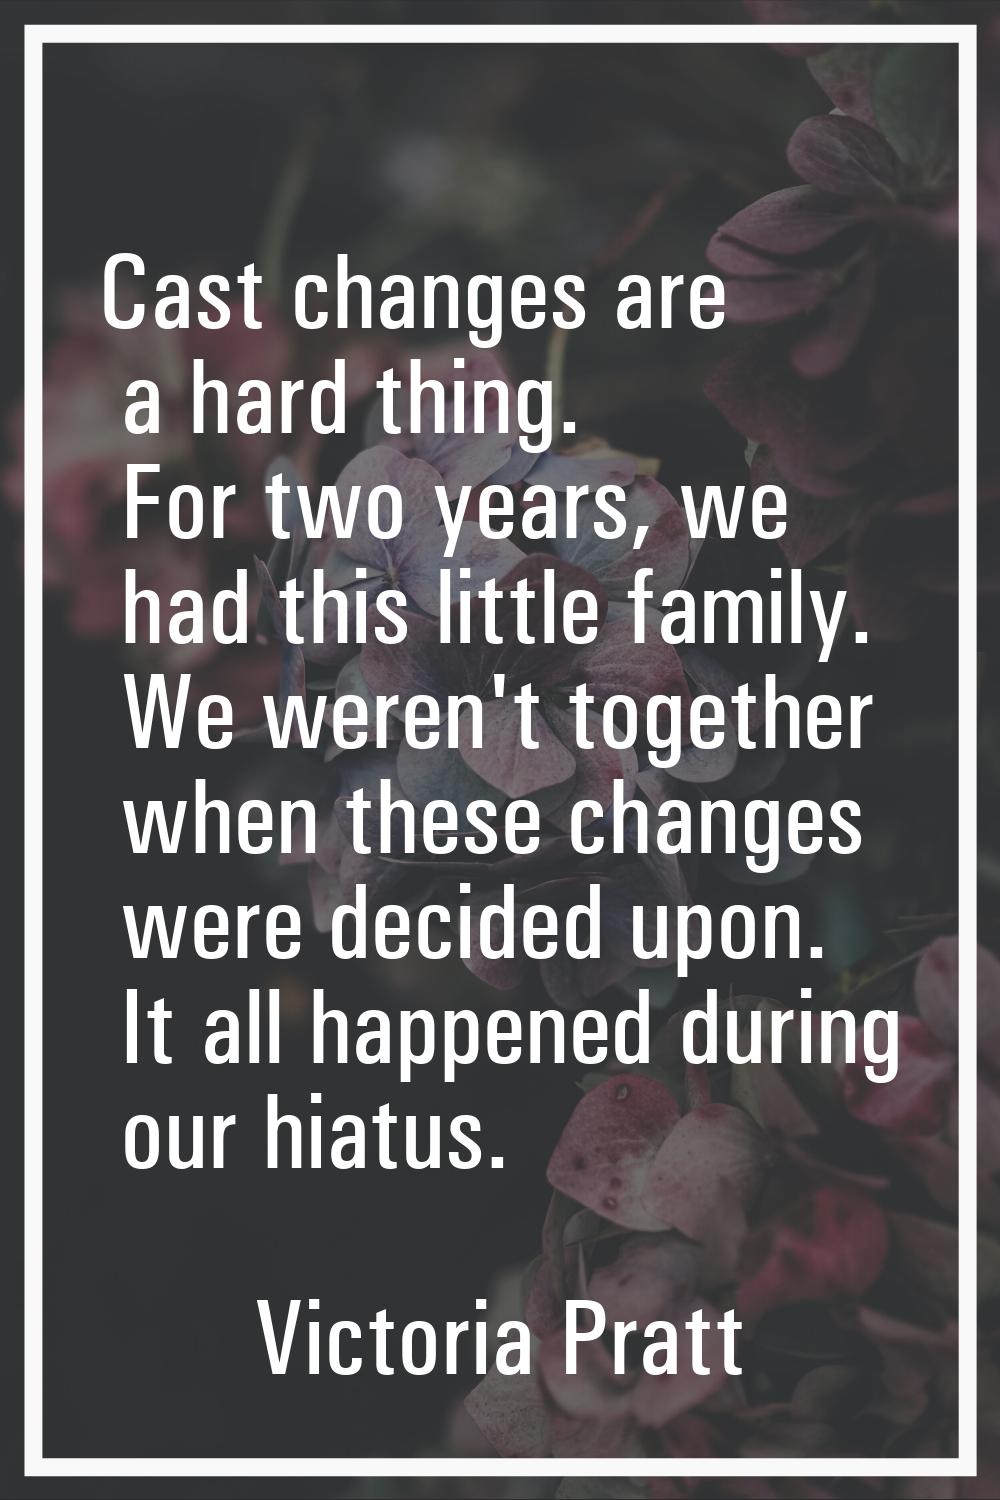 Cast changes are a hard thing. For two years, we had this little family. We weren't together when t